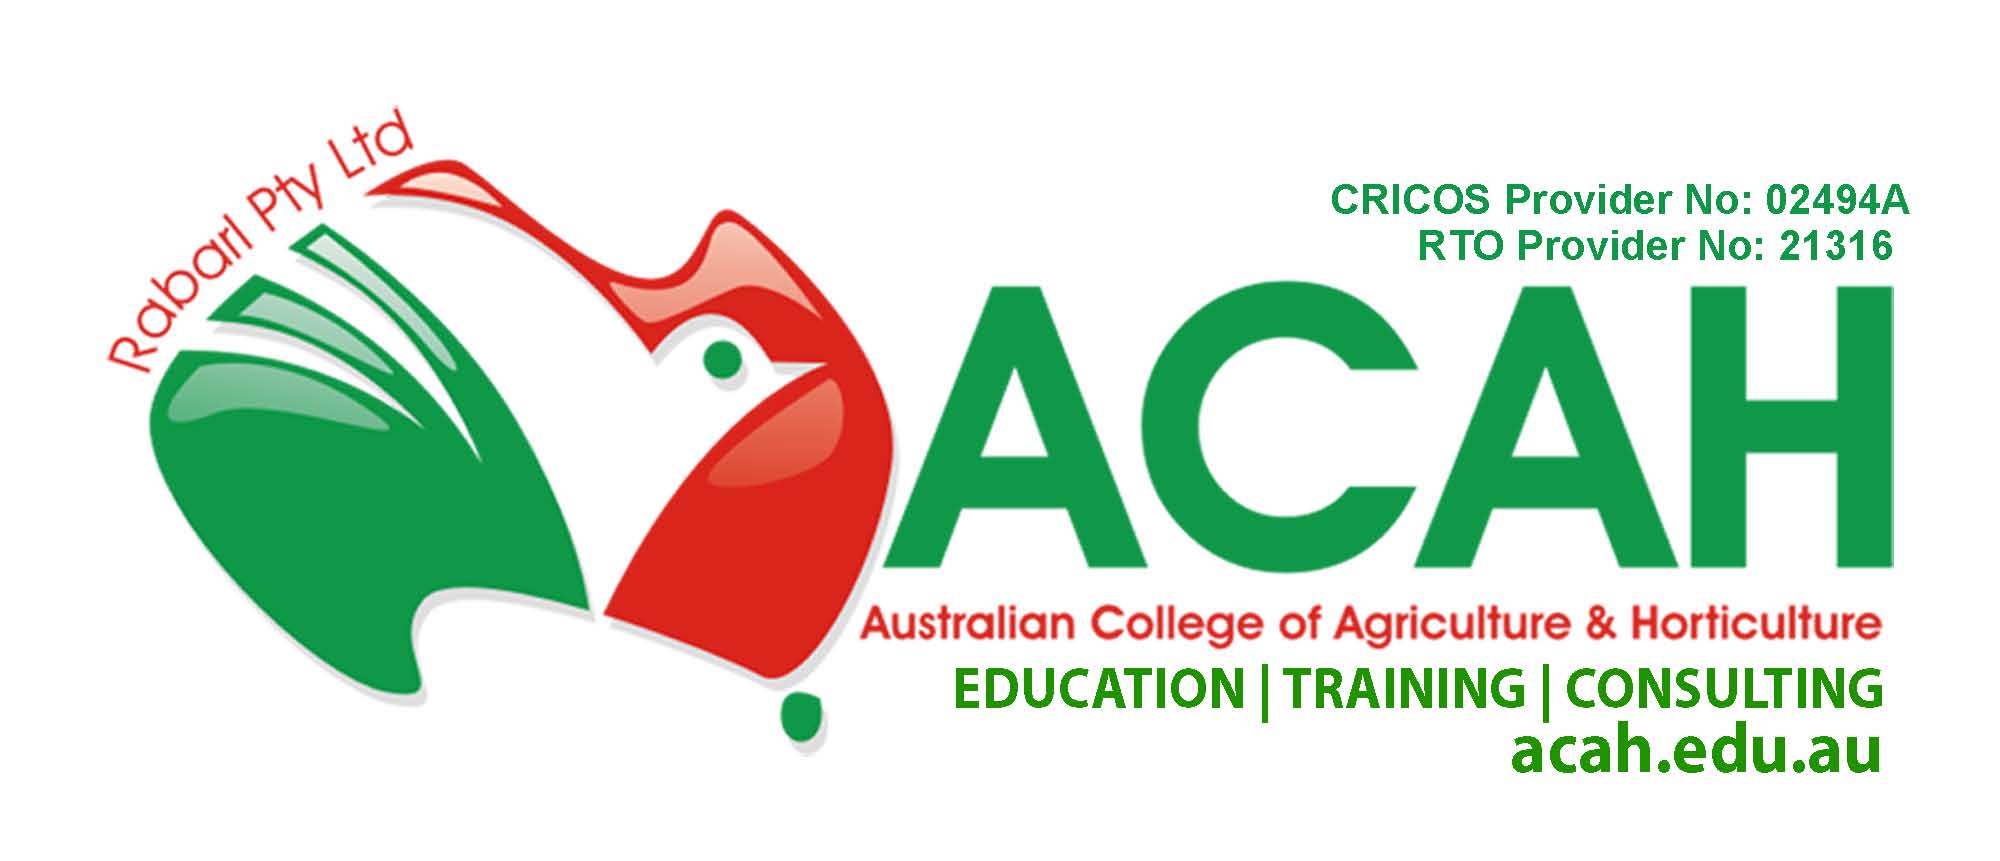 Australian College of Agriculture and Horticulture (ACAH)